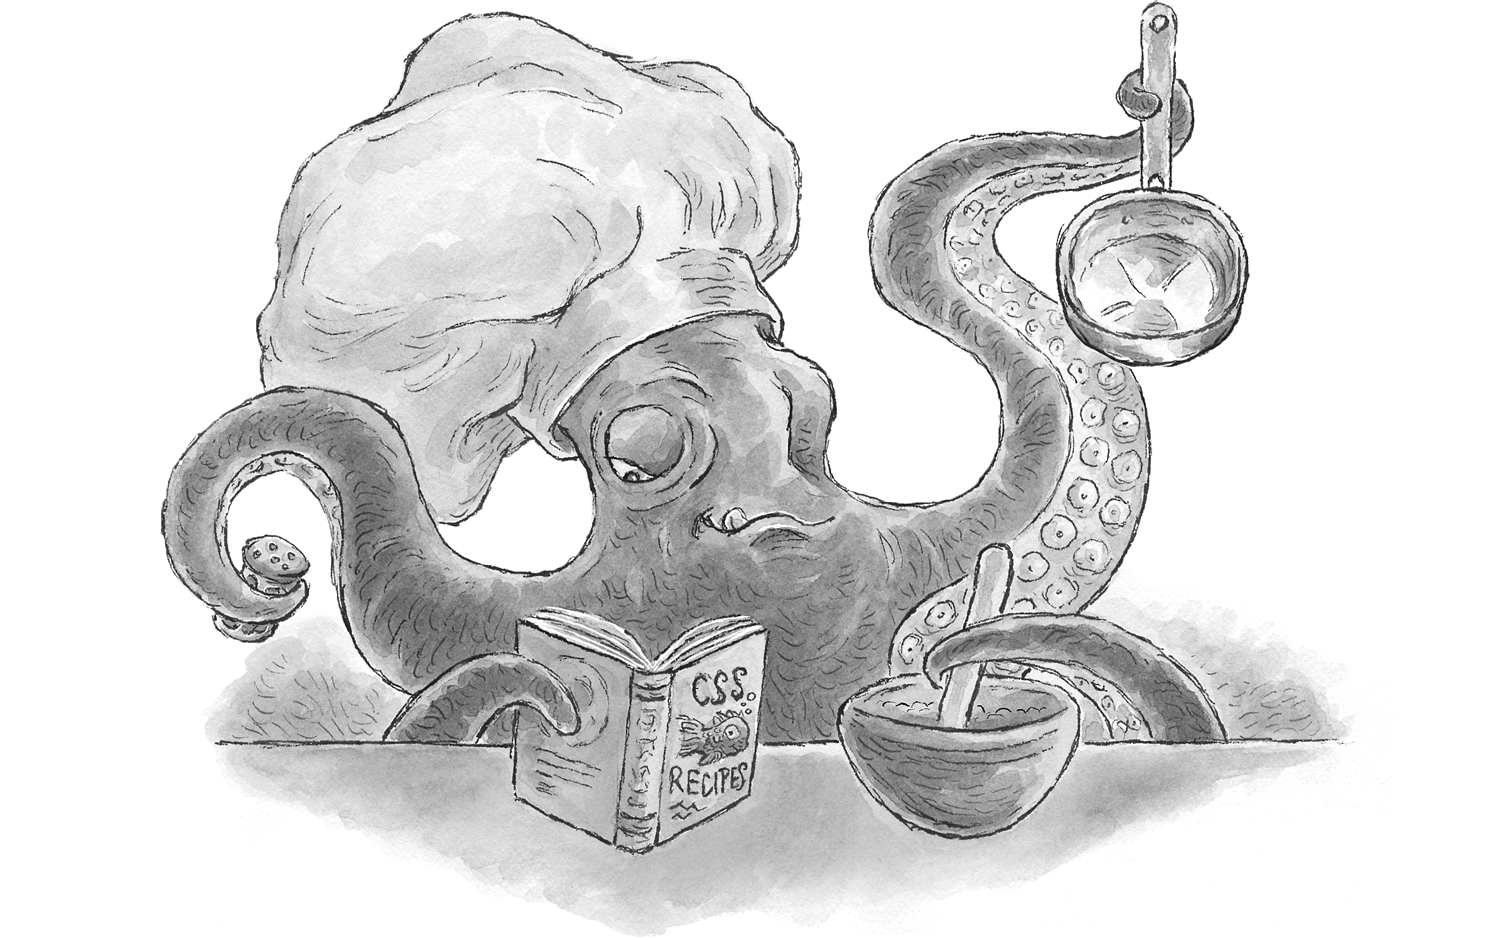 A chef octopus thoughtfully mixes a bowl while consulting a CSS recipe book